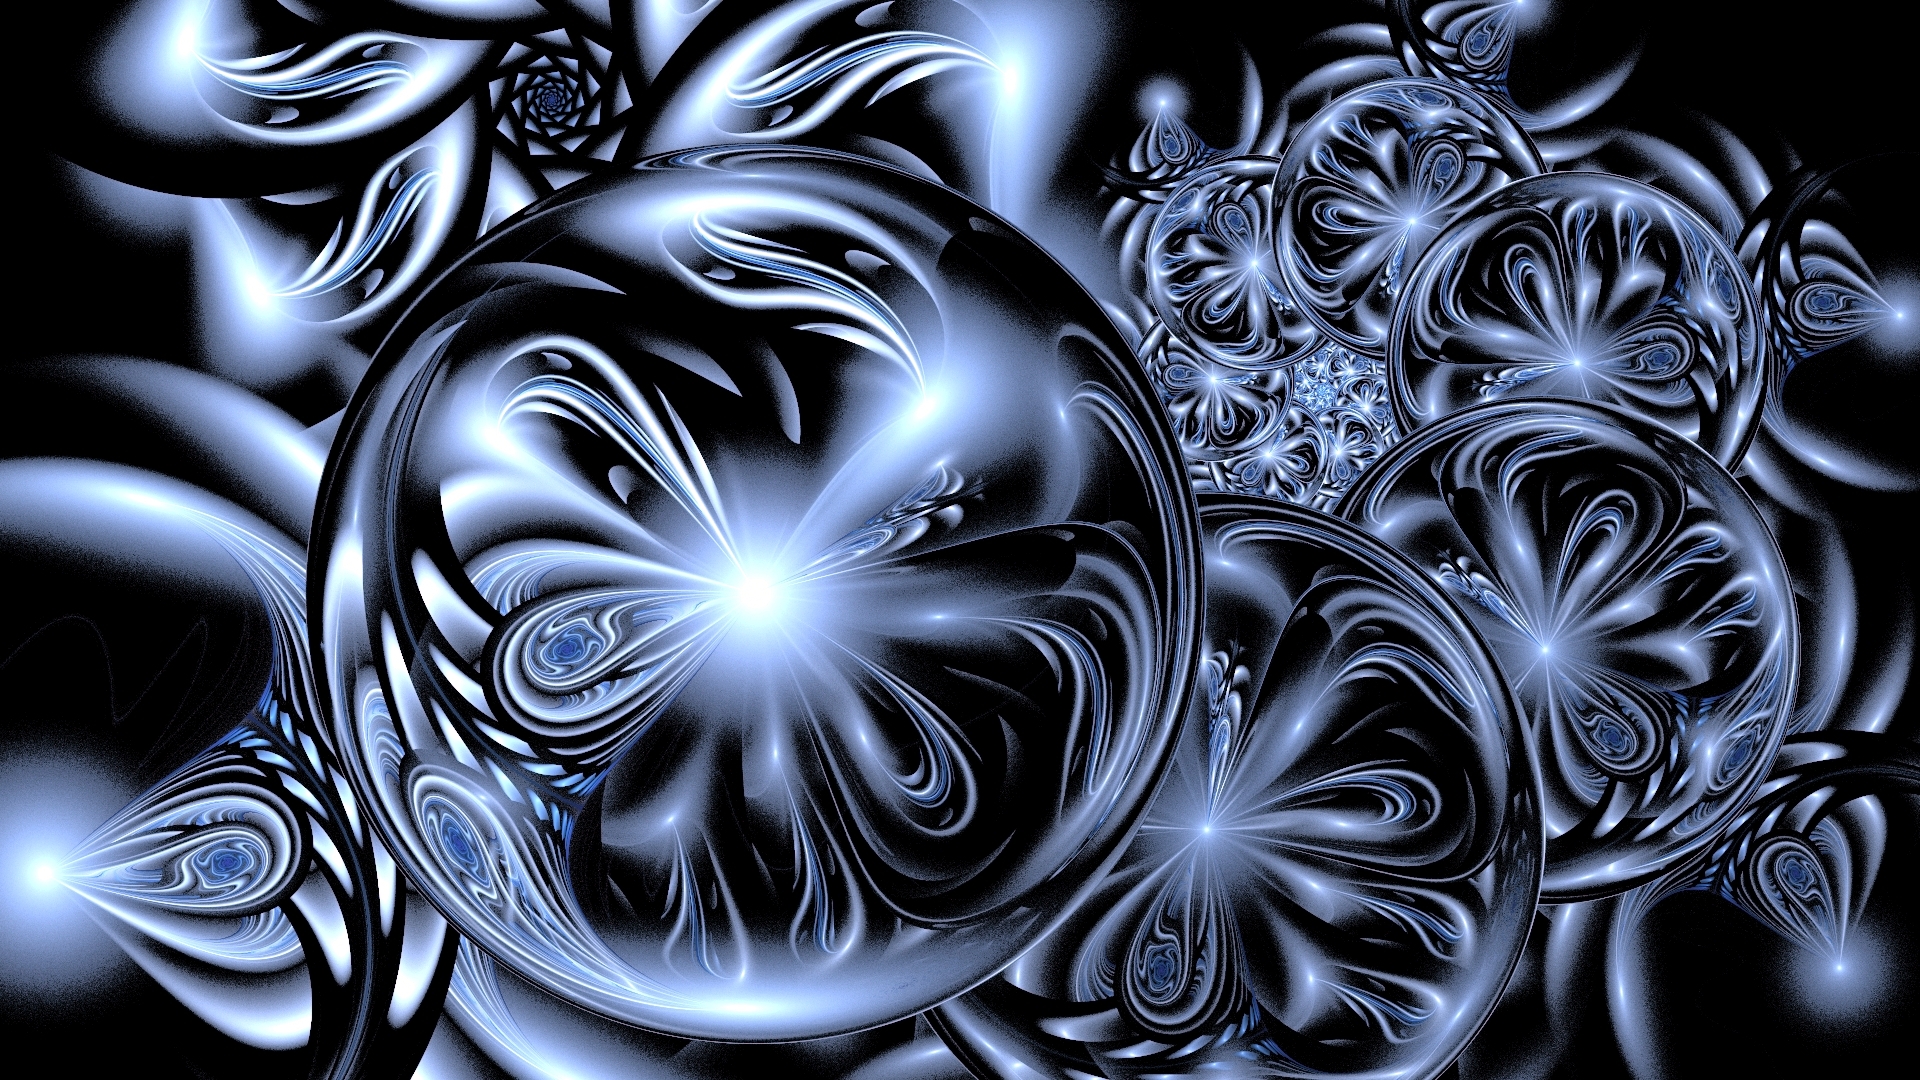 Free Images black, fractal, abstract Silver